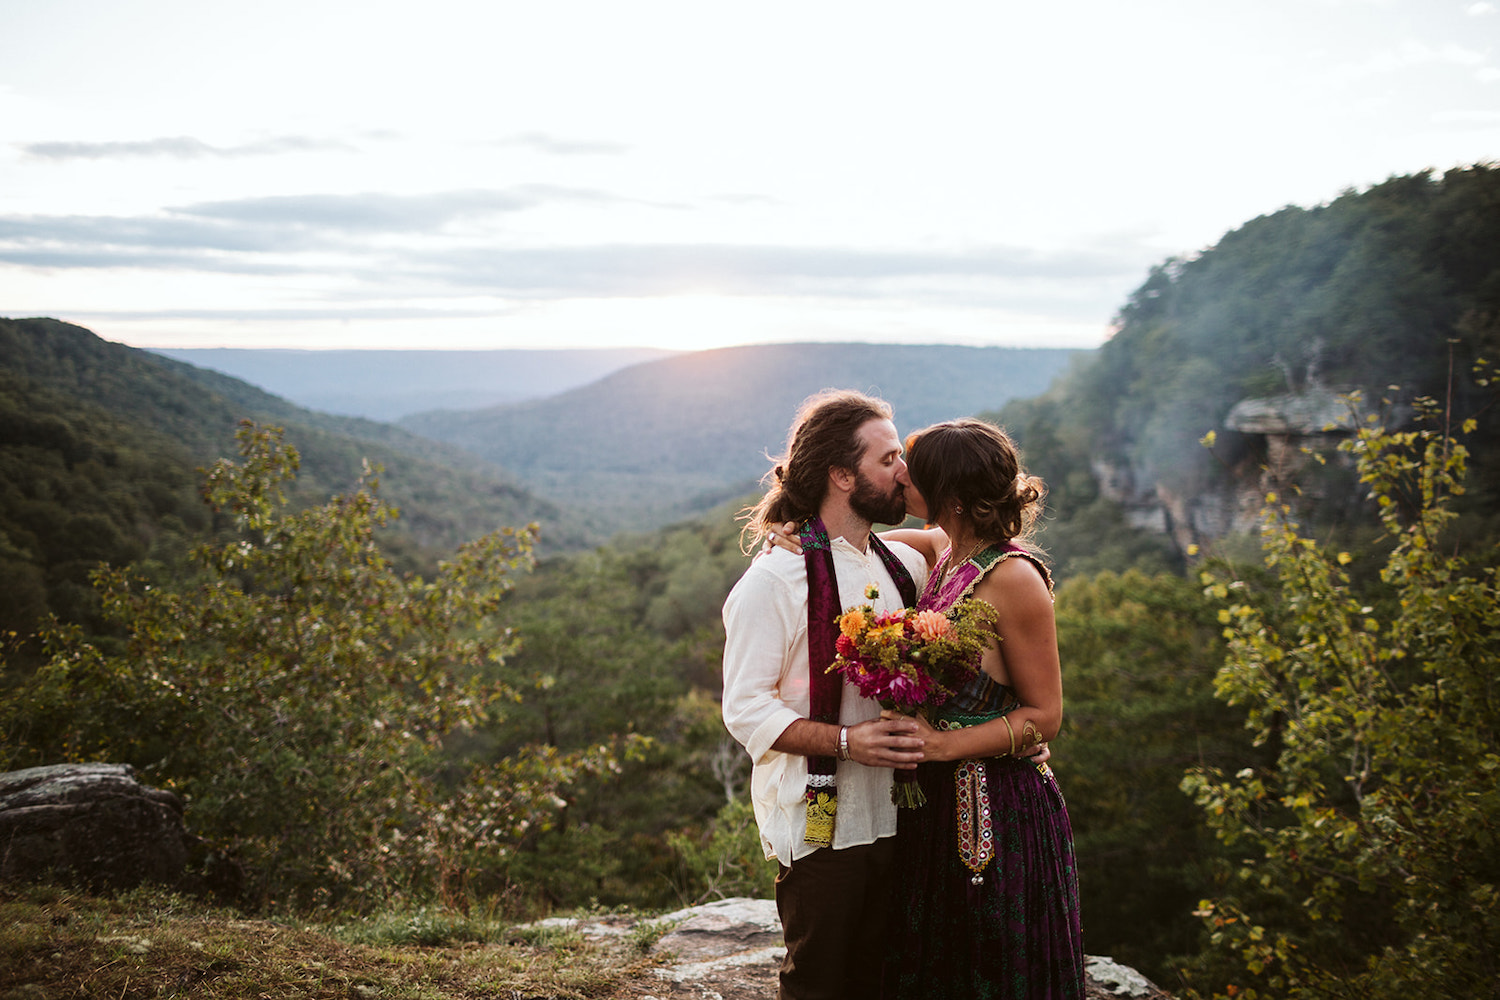 man in white shirt and colorful scarf kisses woman in bright dress at overlook at Hemlock Falls near Chattanooga